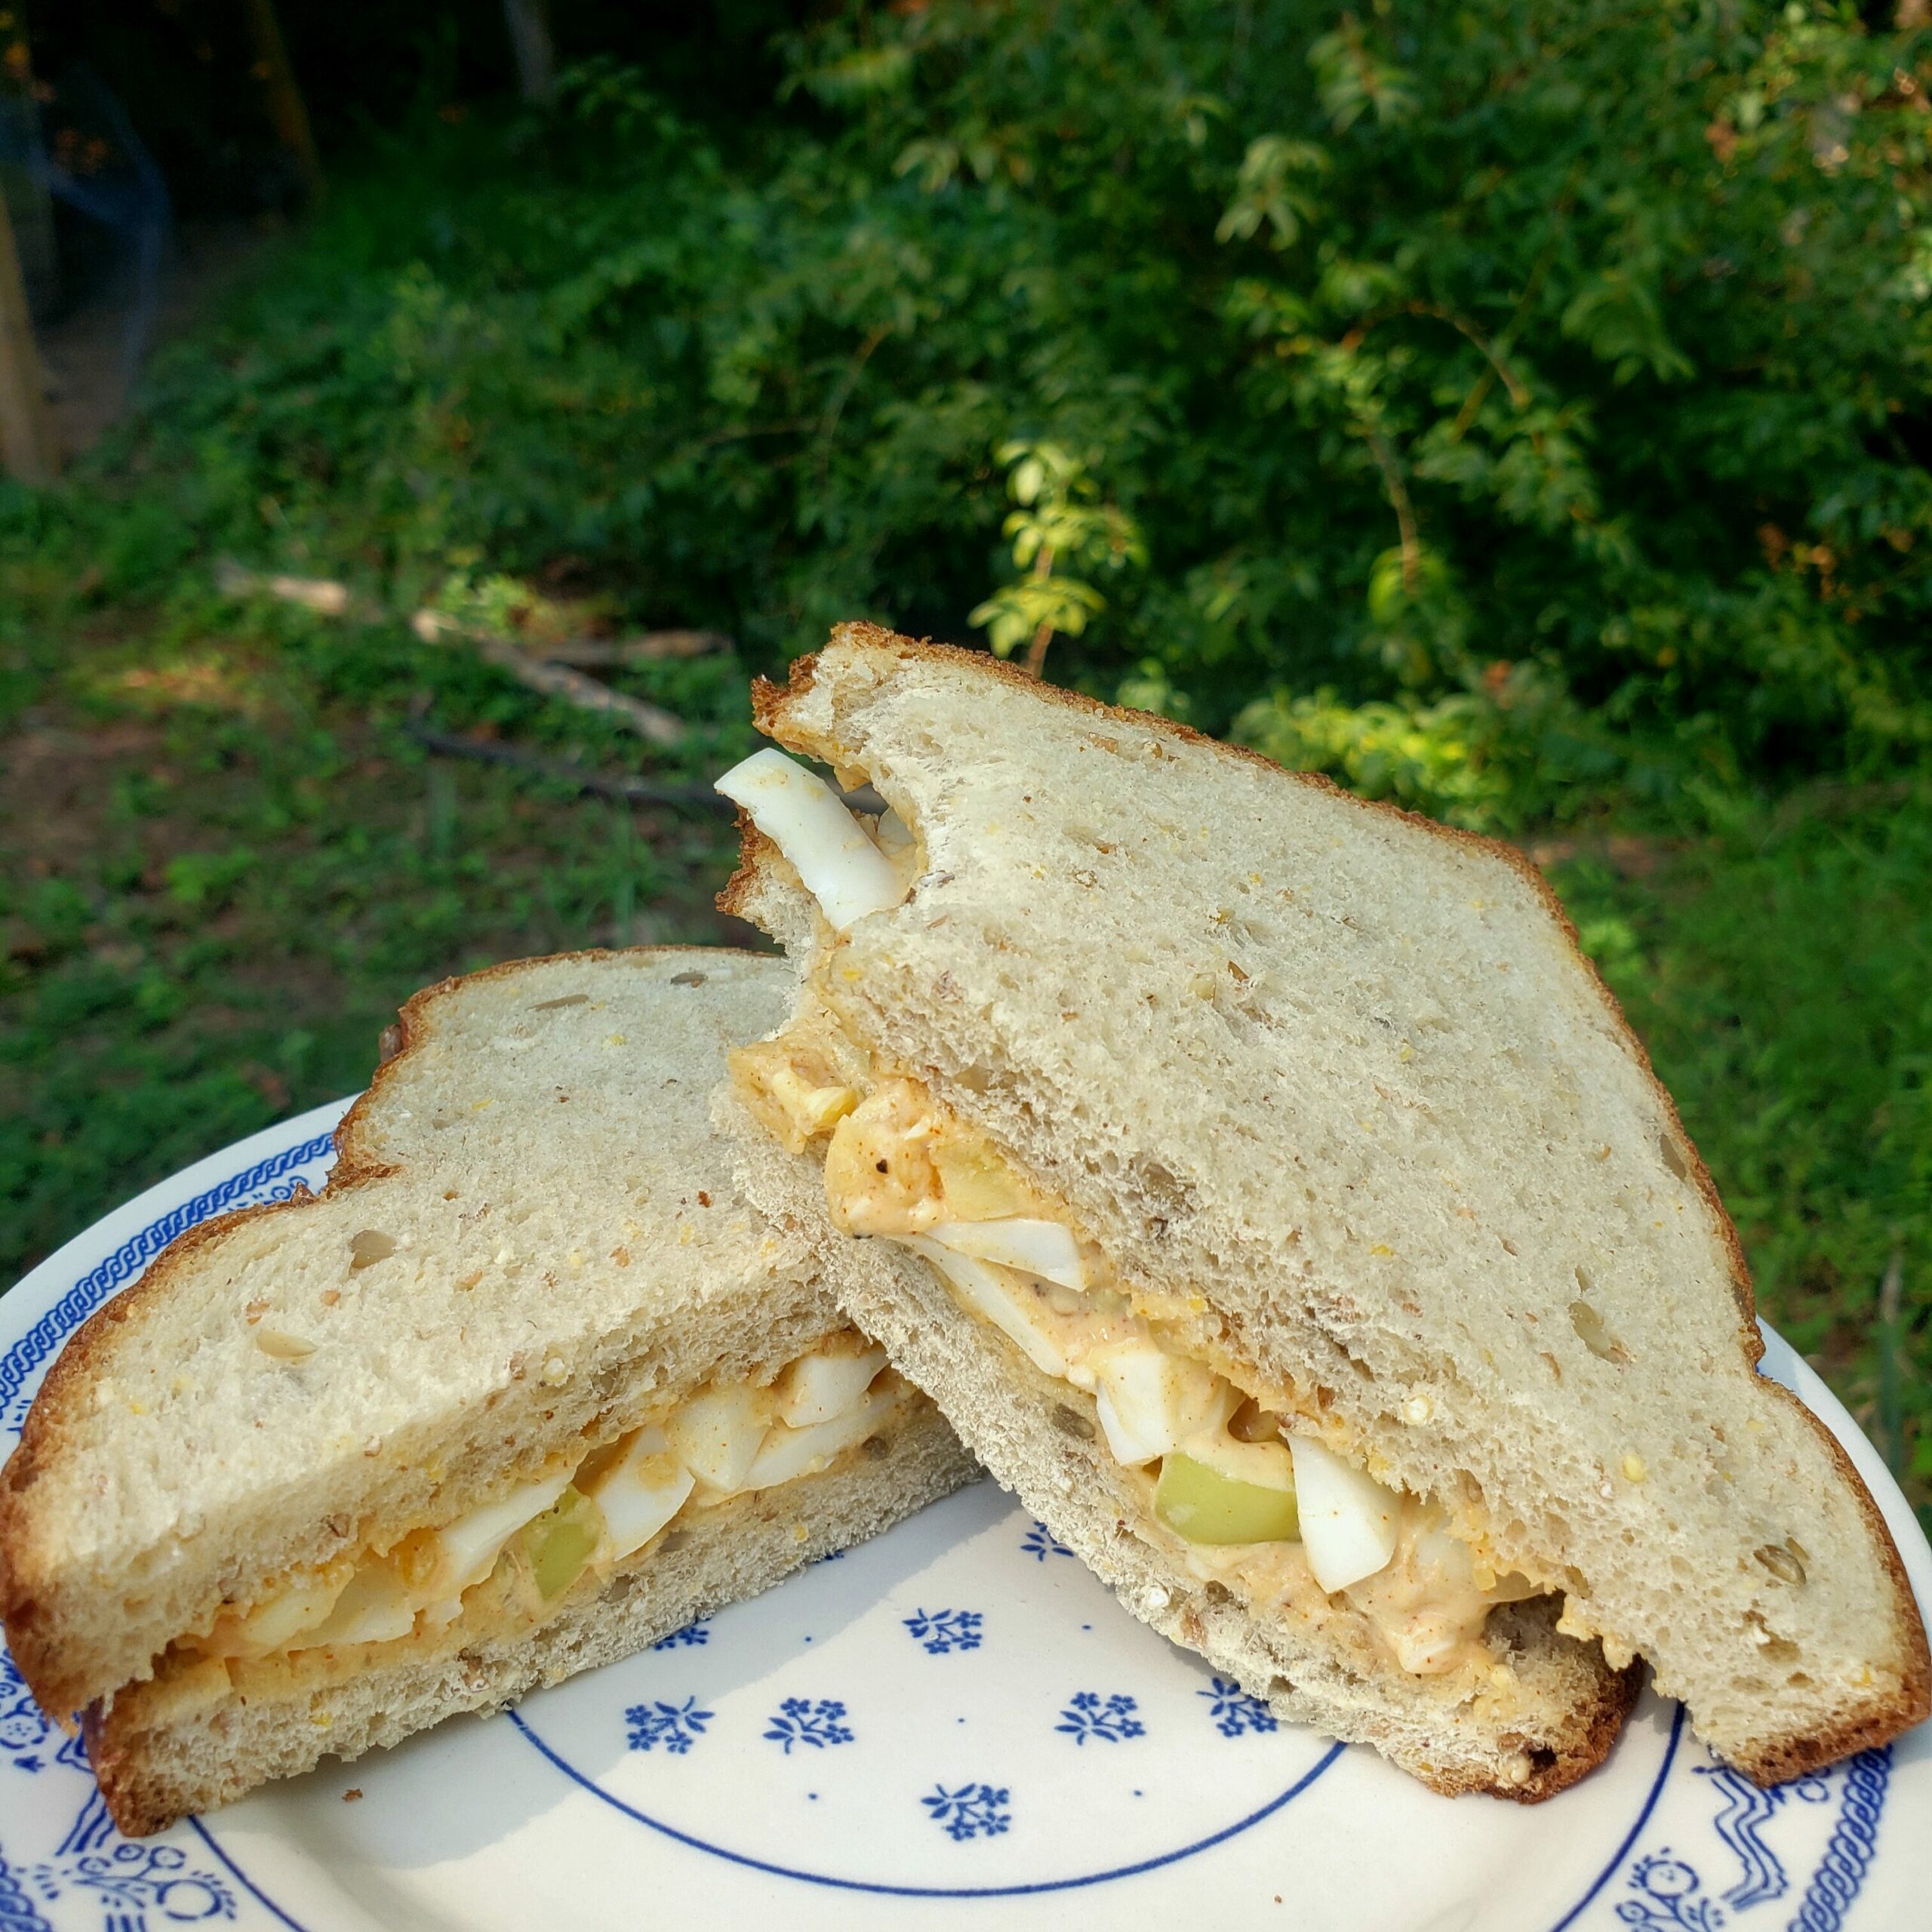 an egg salad sandwich sliced diagonally rests on a blue and white plate against a green background of natural landscape